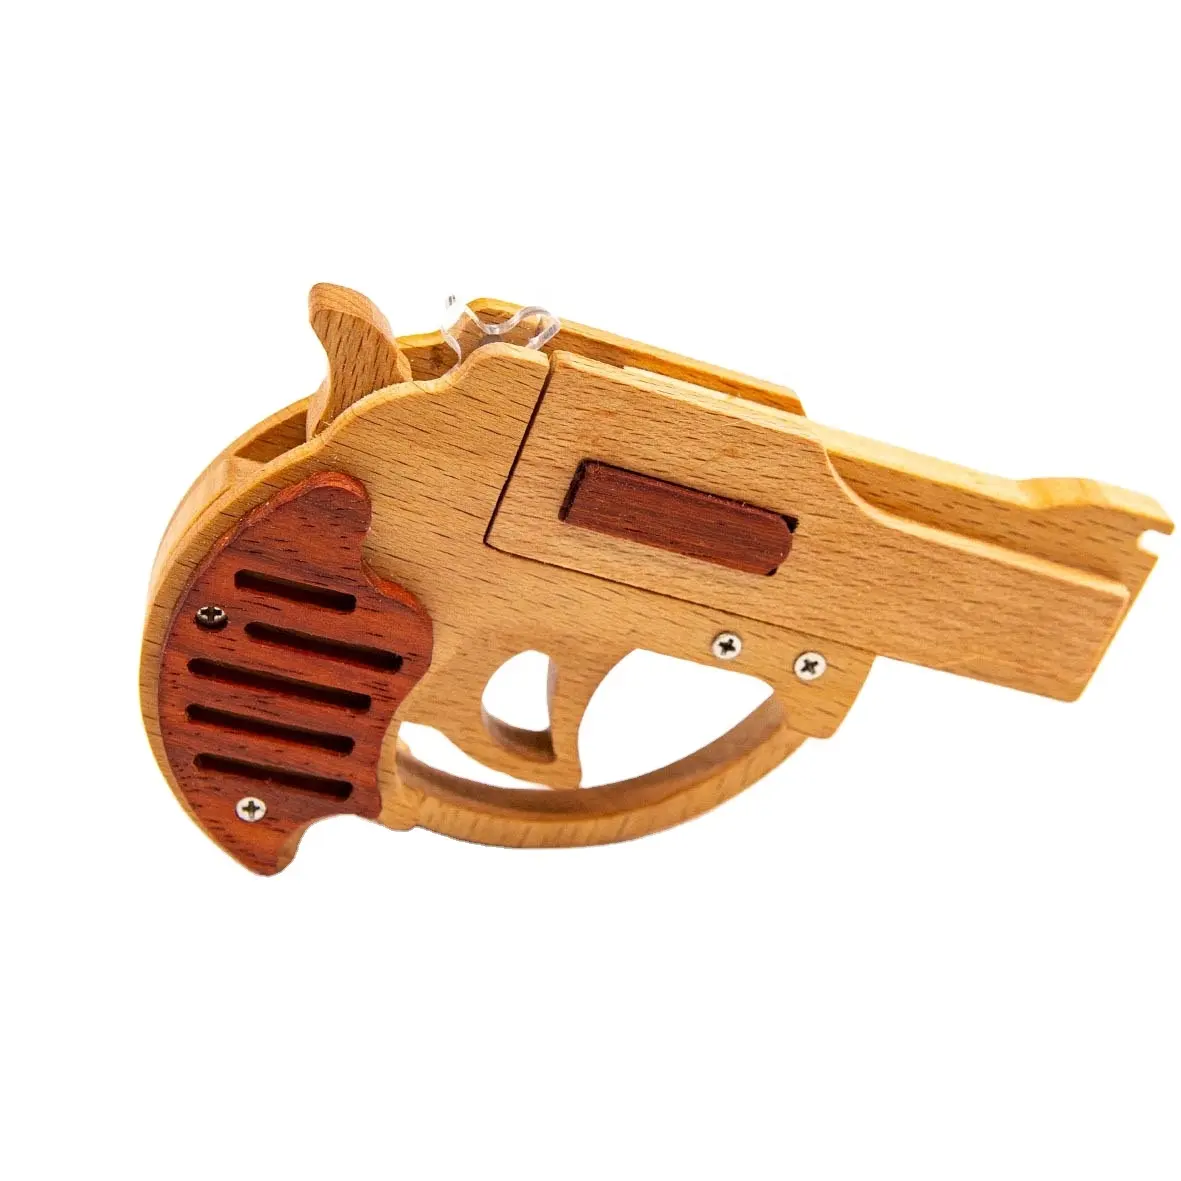 Outdoor sports toy rubber bands toy gun kids shooting playing wooden toy gun